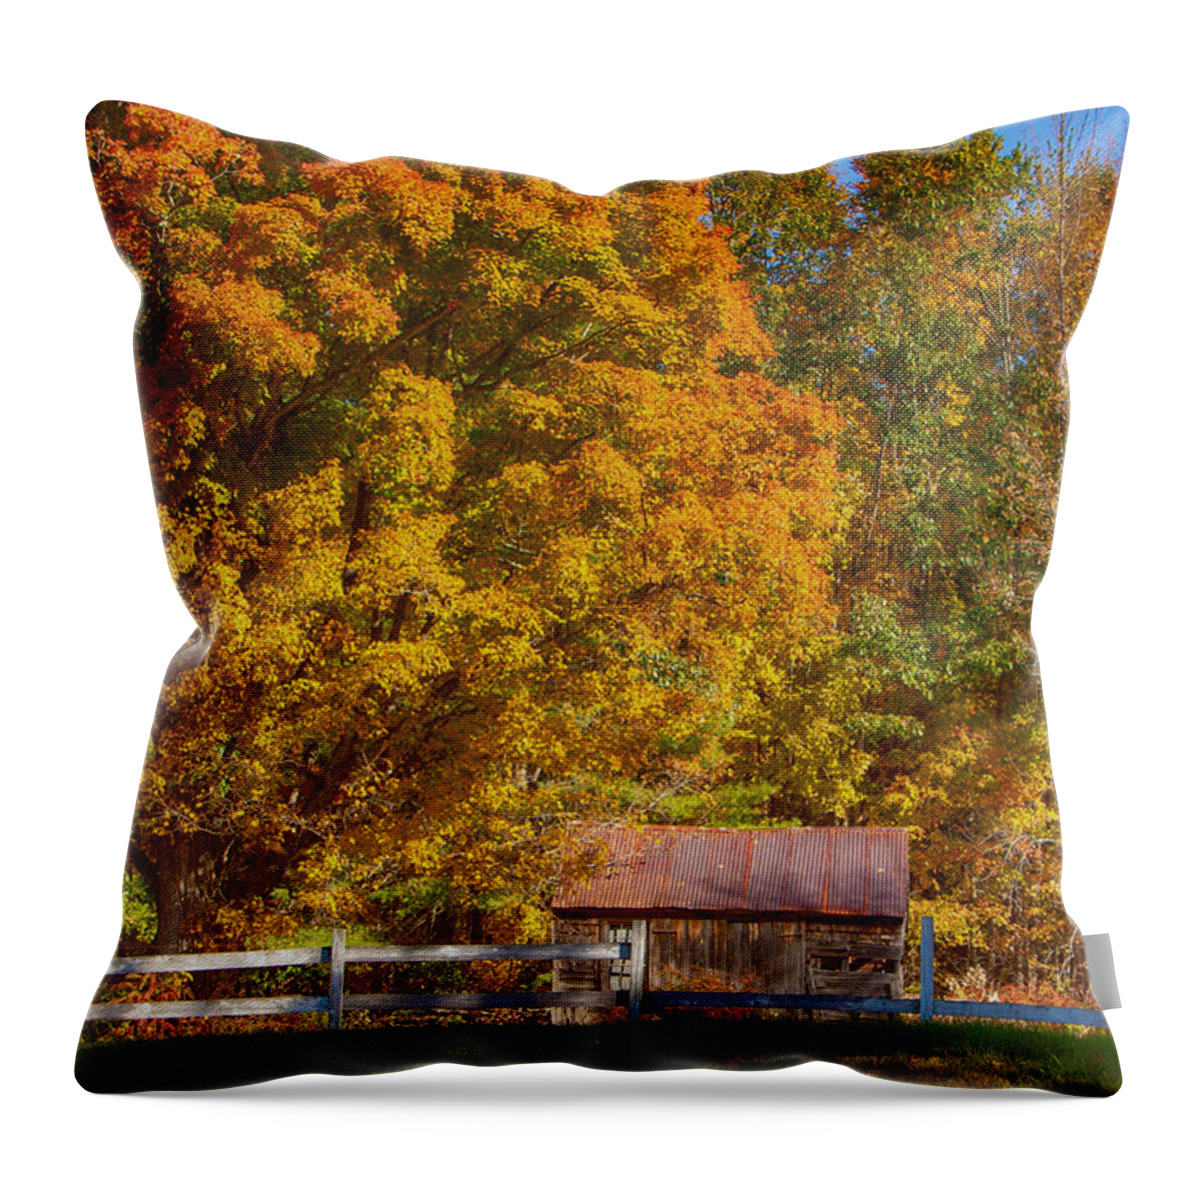 Autumn Throw Pillow featuring the photograph New hampshire barn under fall foliage by Jeff Folger